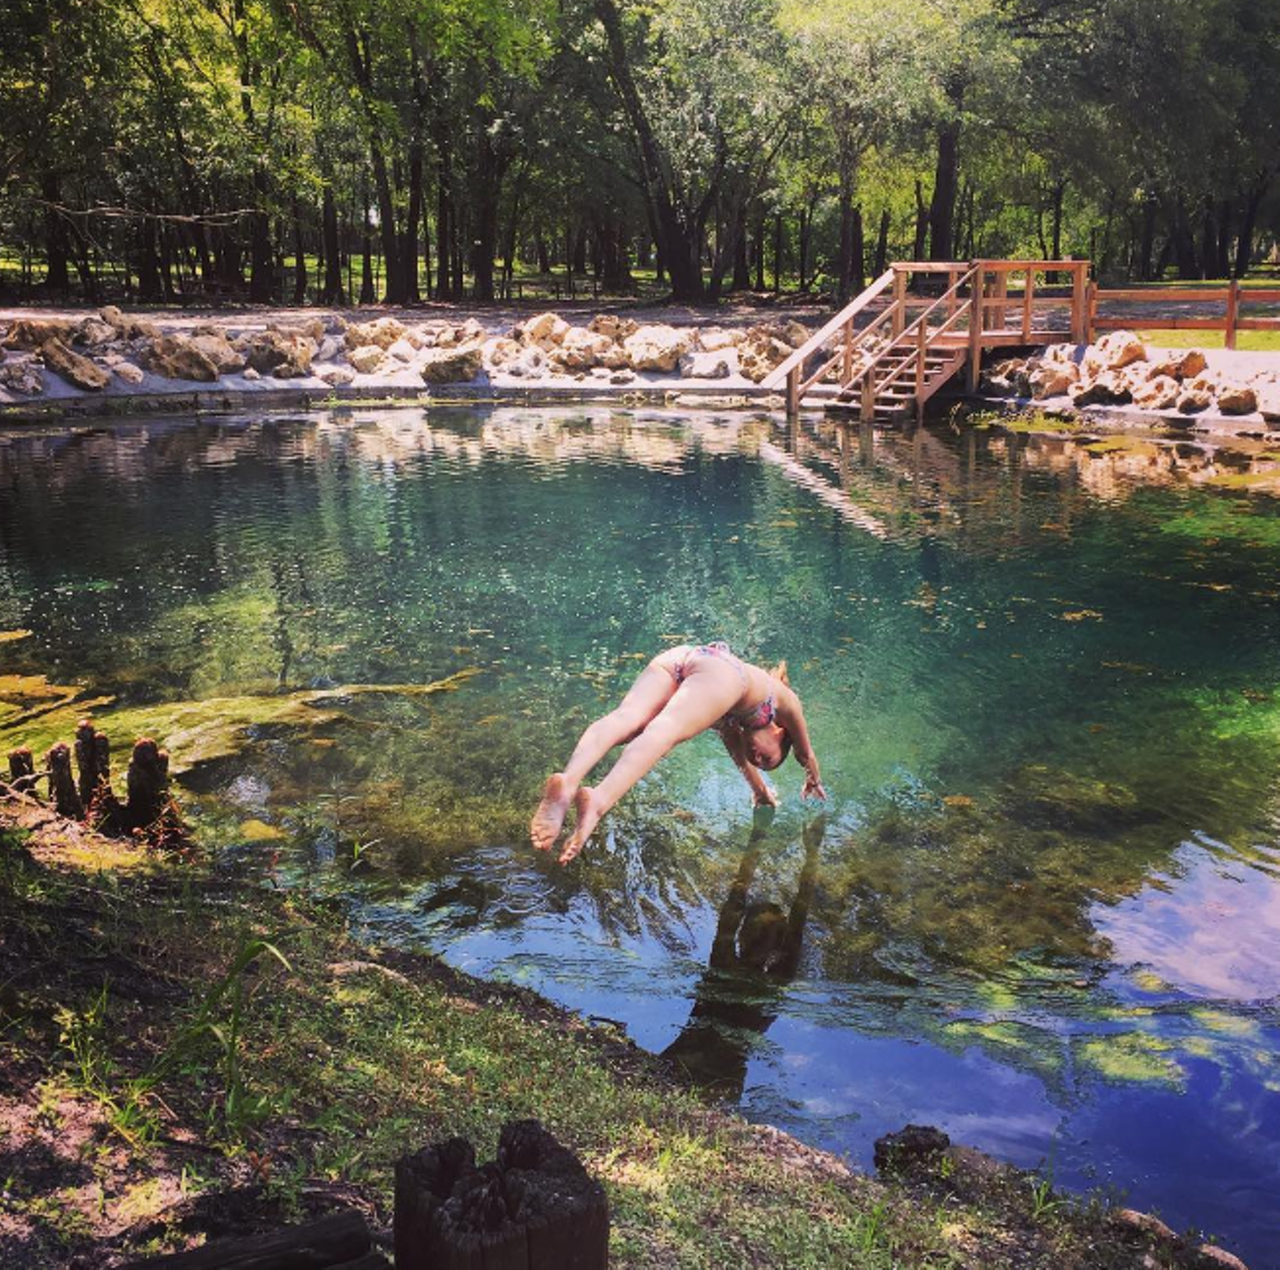 Otter Springs
Estimated driving distance from Orlando: 2 hours 23 minutes 
Flowing into the nearby Suwannee River, this 636 acre spring area offers fishing, hiking and other outdoor activities. There is also an enclosed pool pavilion and primitive tent areas or cabins with air conditioning, kitchens and more.
Photo via raudiom/Instagram